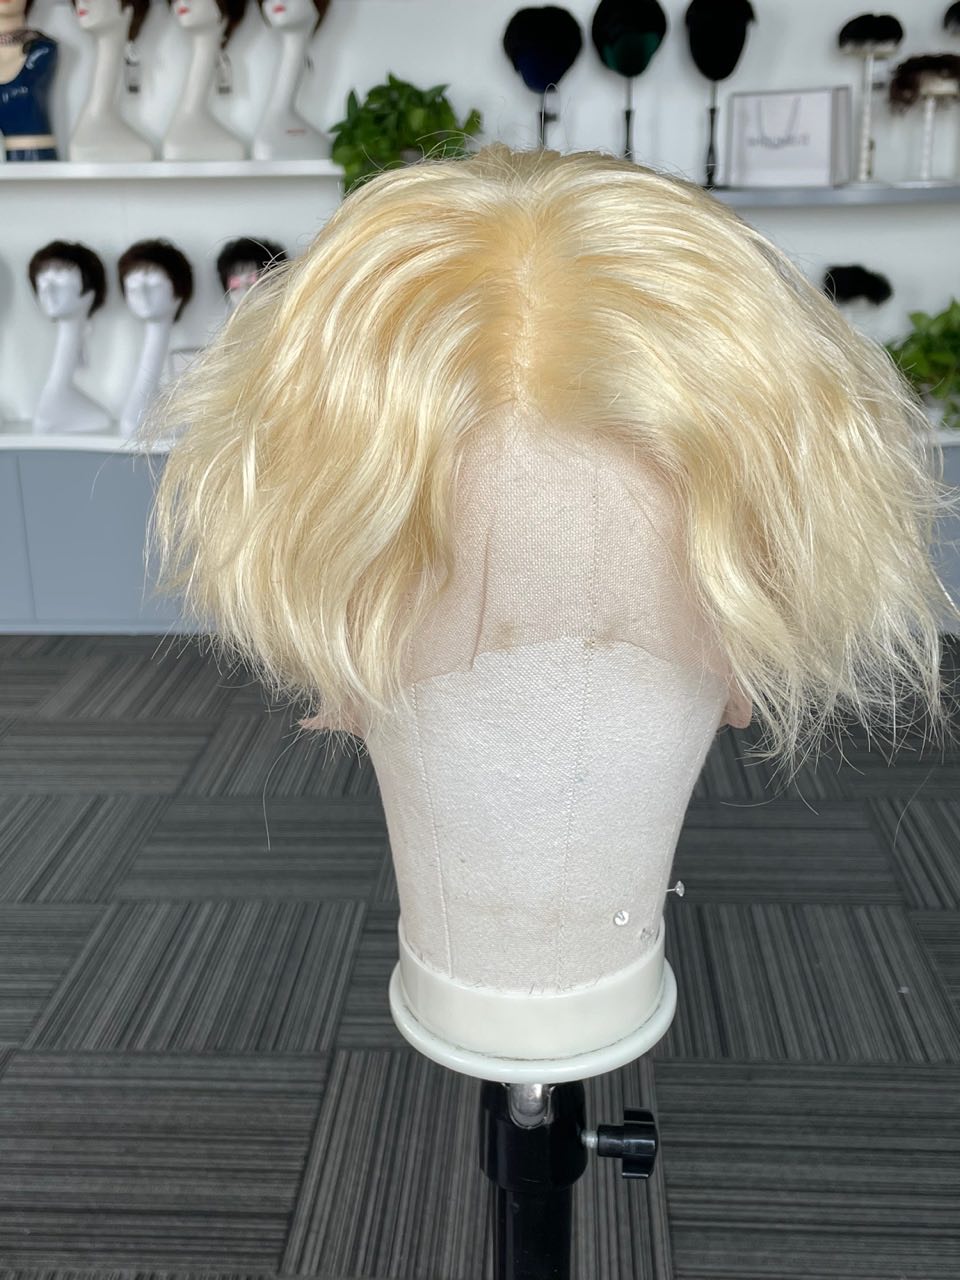 2023 Fashionable Men's Hairstyles #613 Transparent Full Lace Human Hair Wigs For Baldness 130% Glueless Realistic Wavy Blonde Full Lace Wig For Men Wholesale